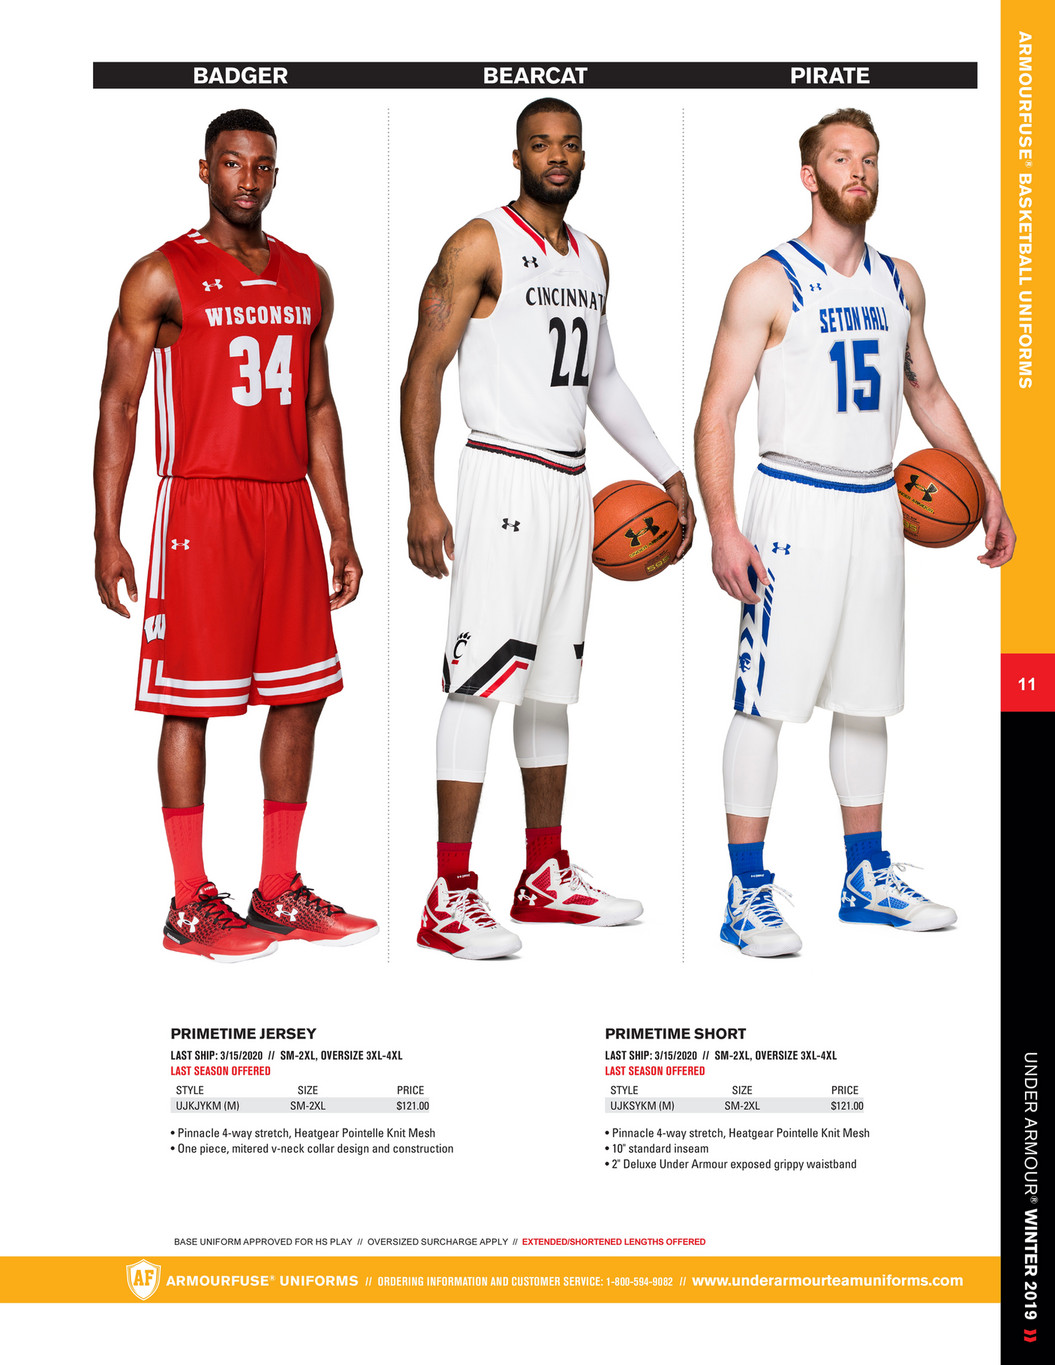 ONETeam Sports Group - Under Armour FW19 Team Basketball - Page 28-29